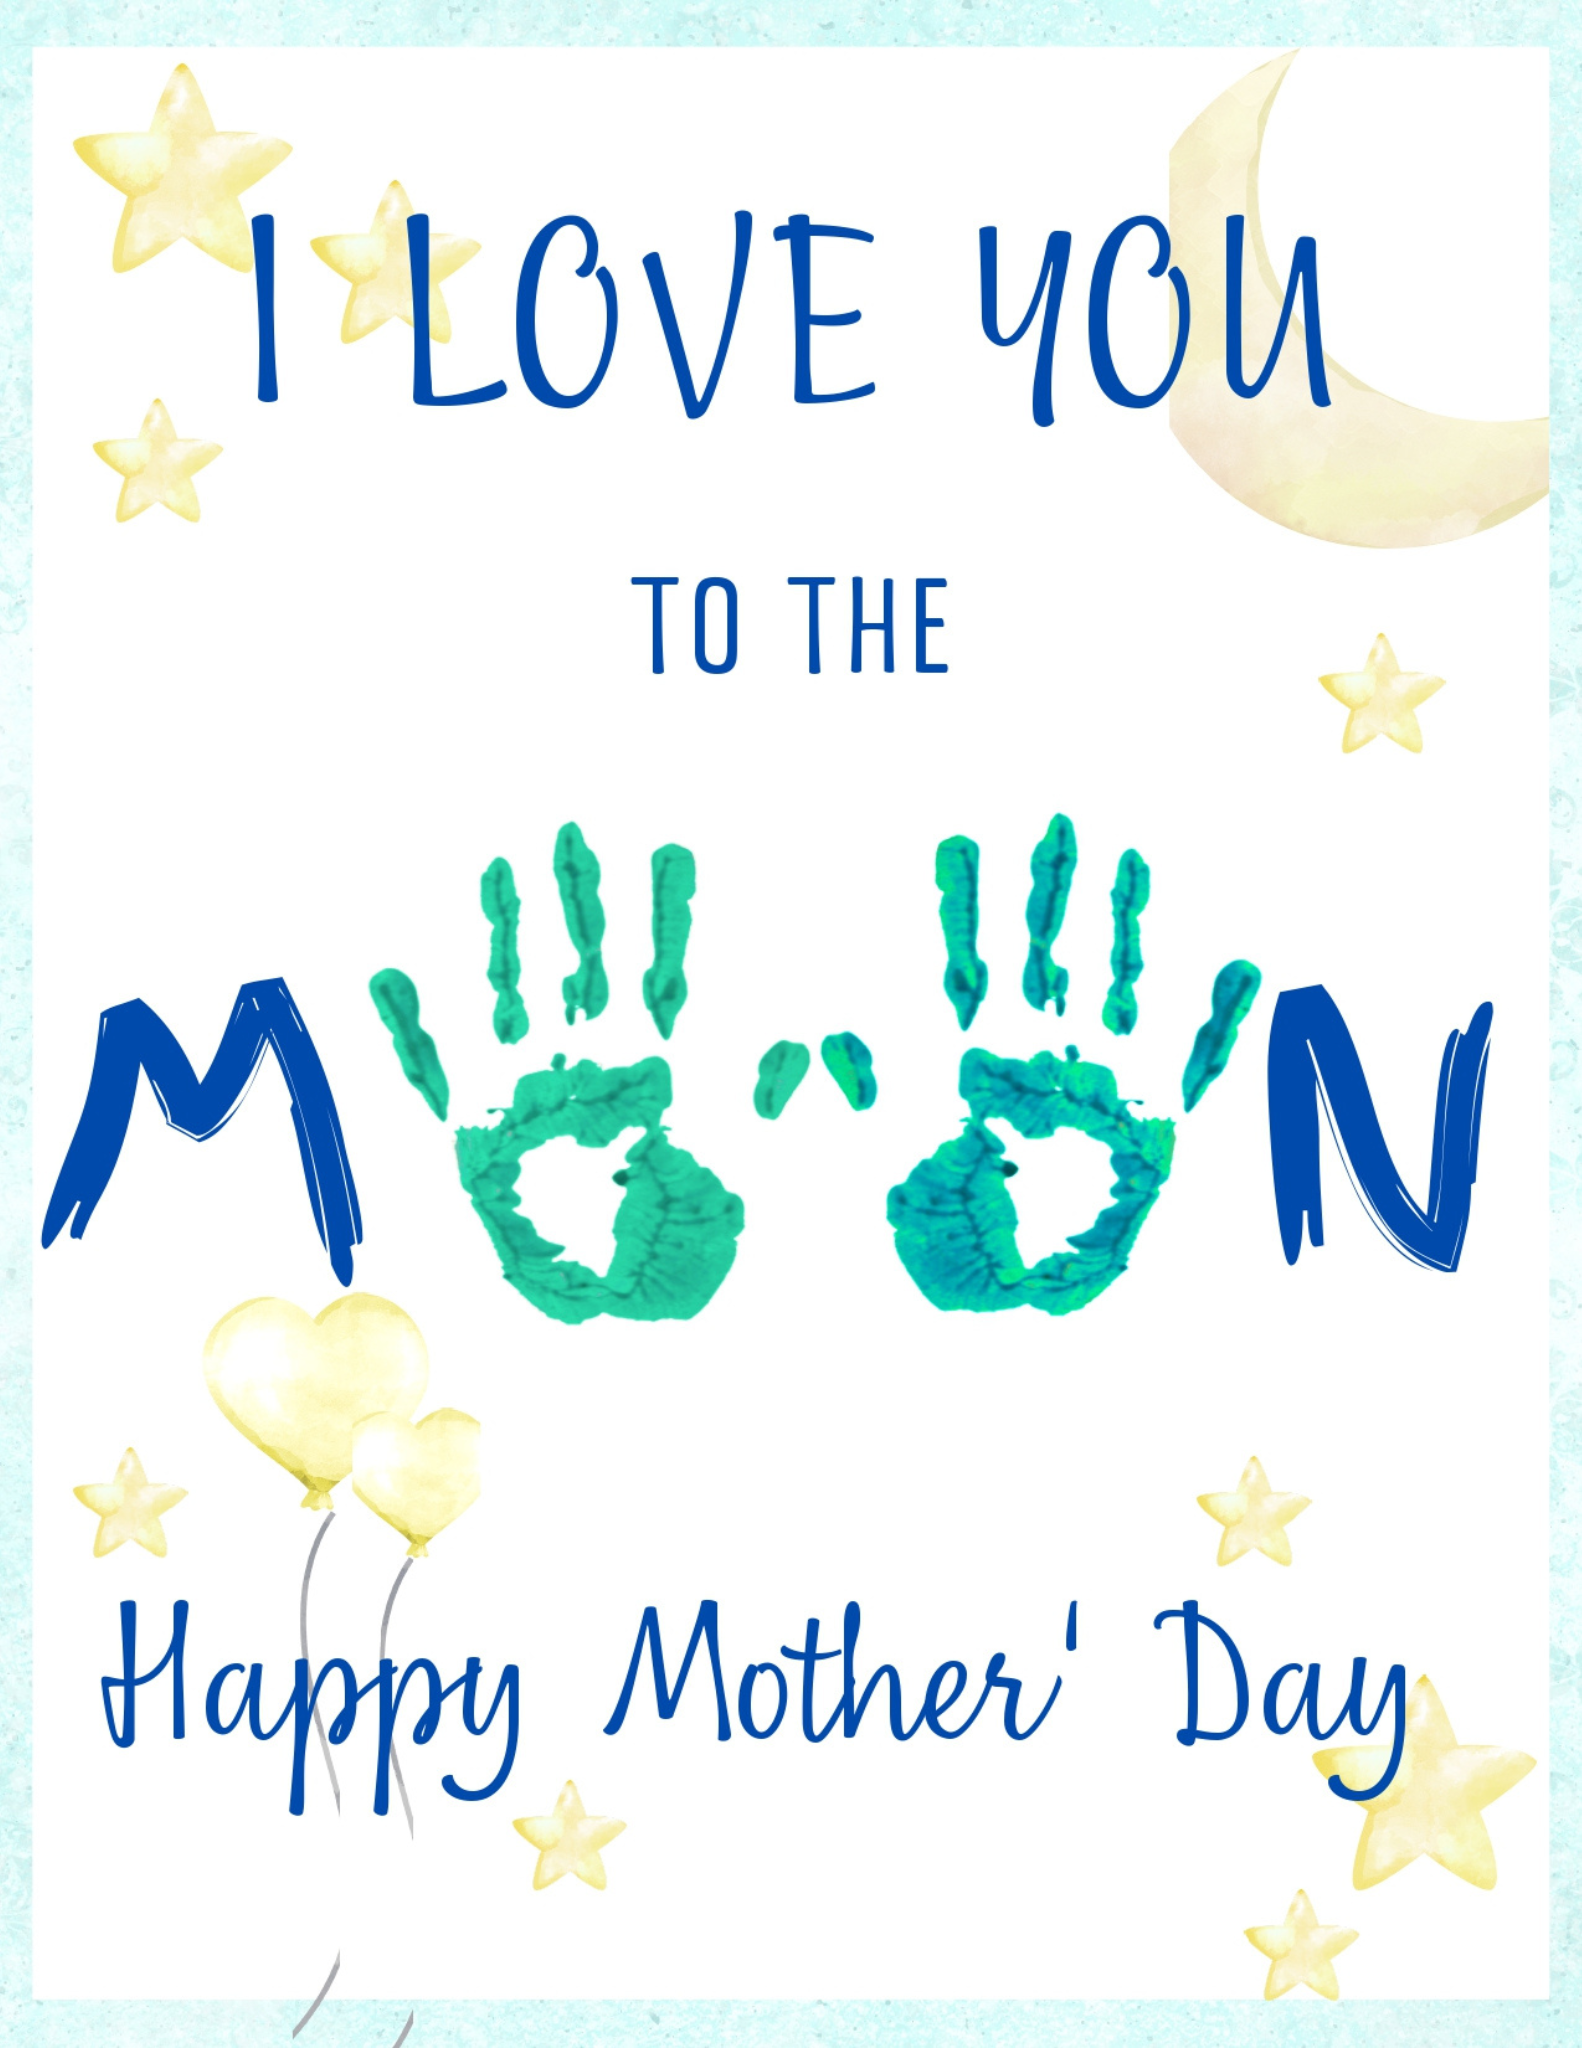 I love you to the moon handprint art for moms on mother's day